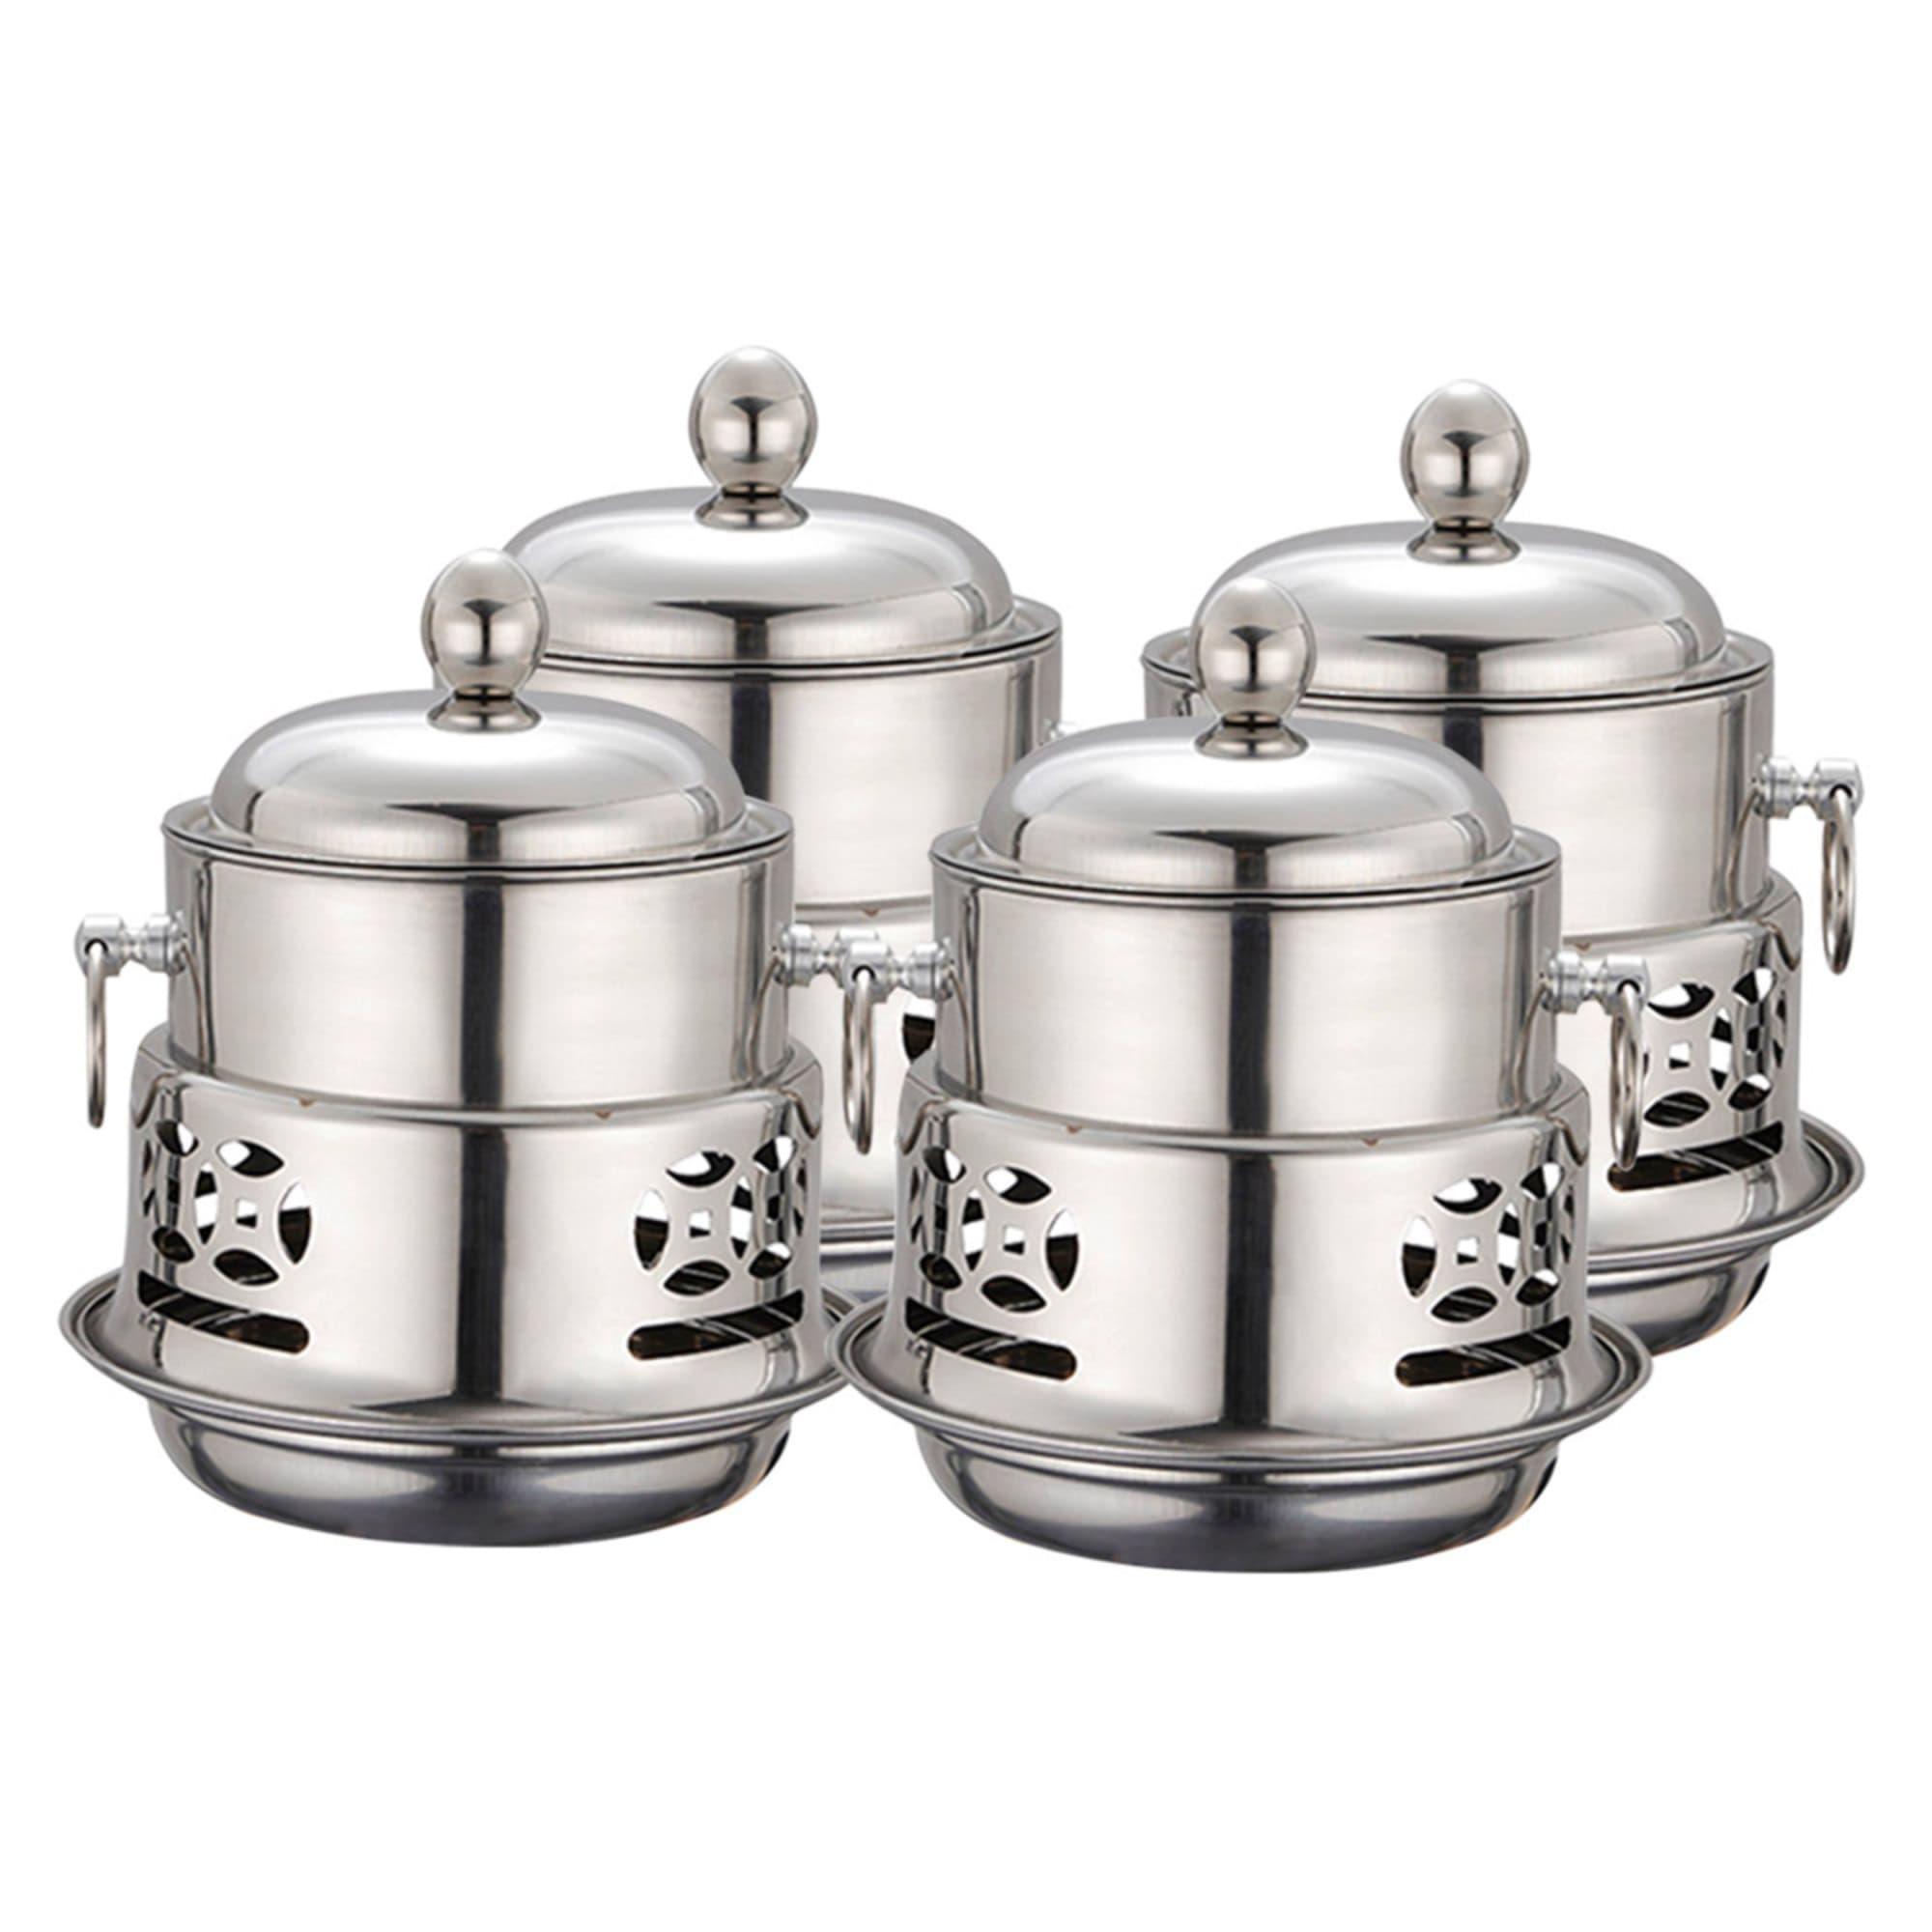 Soga Round Stainless Steel Single Hot Pot with Lid 20cm Set of 4 Image 1